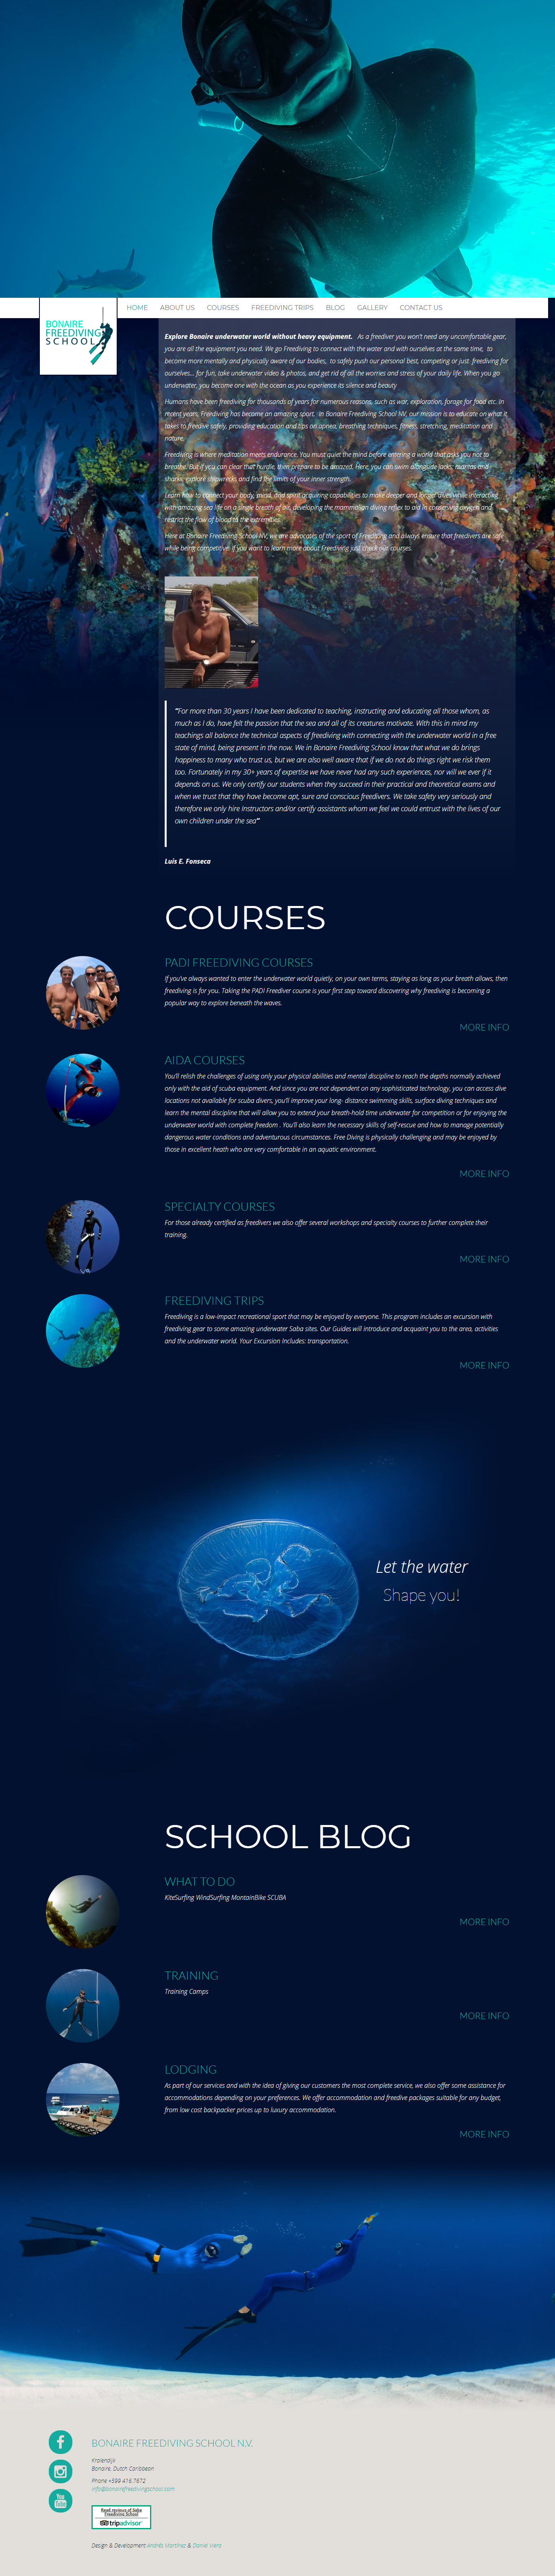 Bonaire Freediving School | Freediving school, originally located in Saba, and after the hurricane with new headquarters in Bonaire. Responsive website developed for WordPress with bootstrap and infinite scroll.